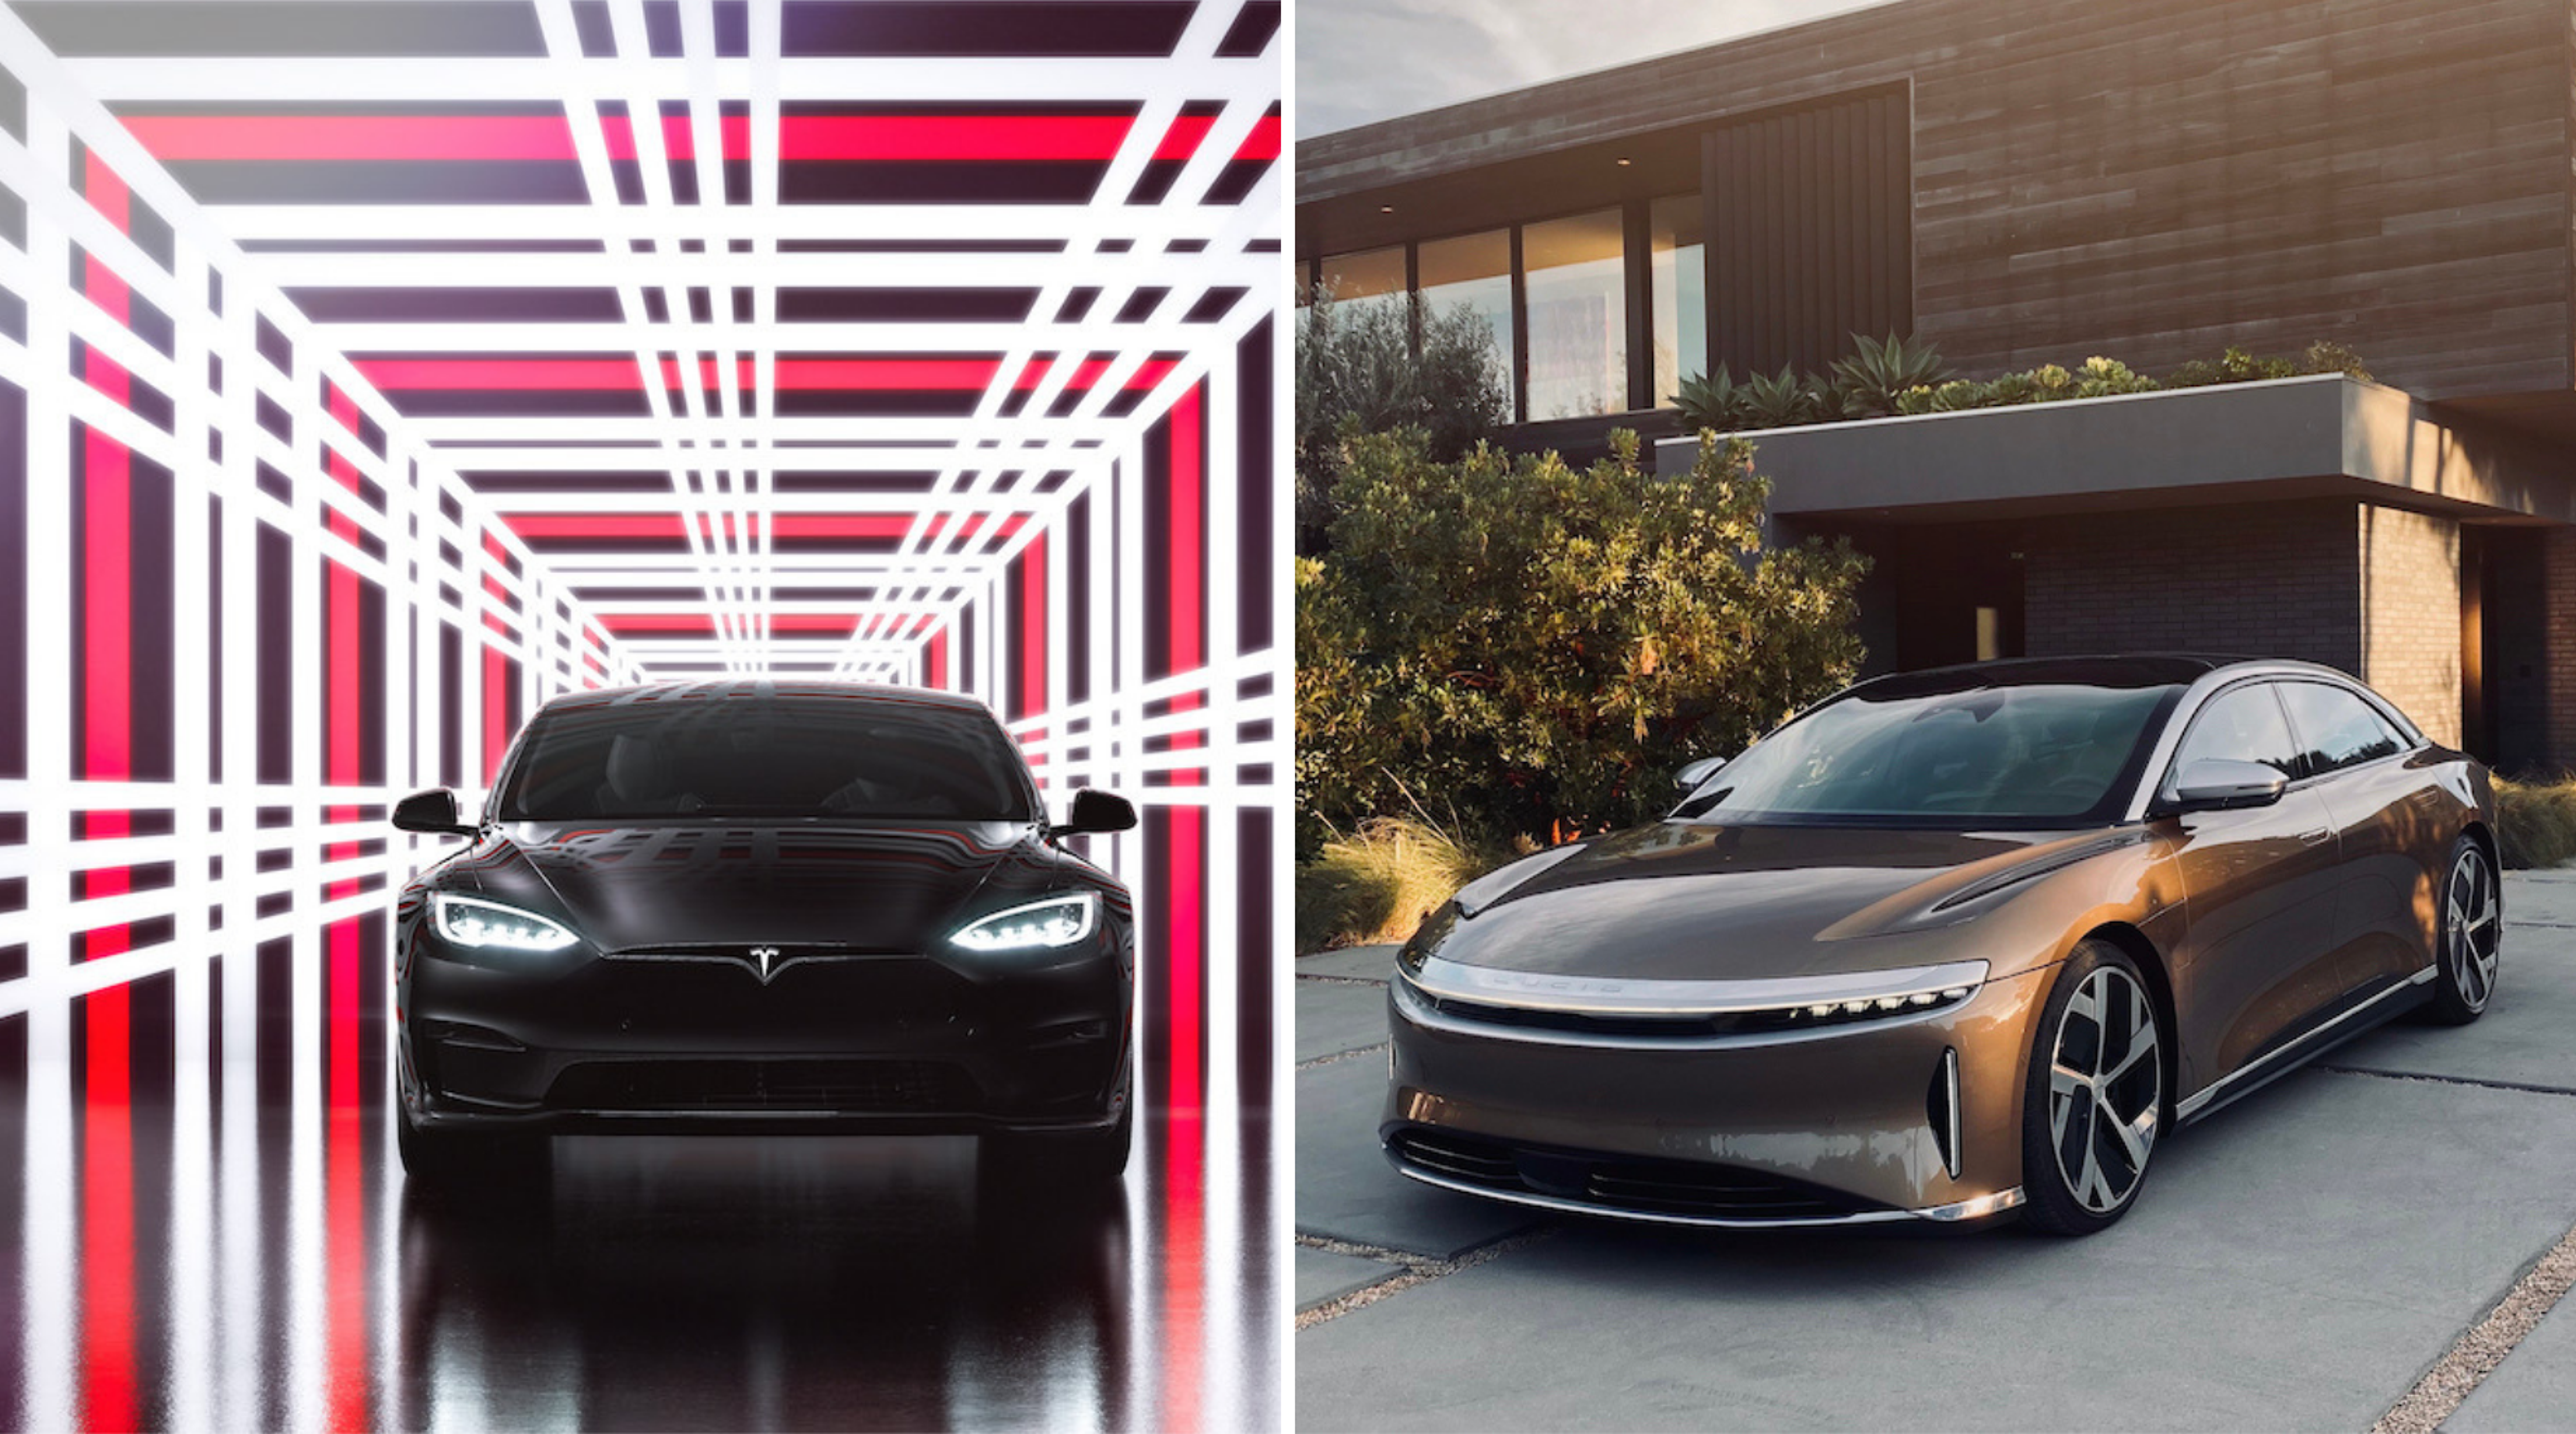 So Does Tesla Or Lucid Make The Cooler-Looking Electric Vehicle? Over 60% Say...